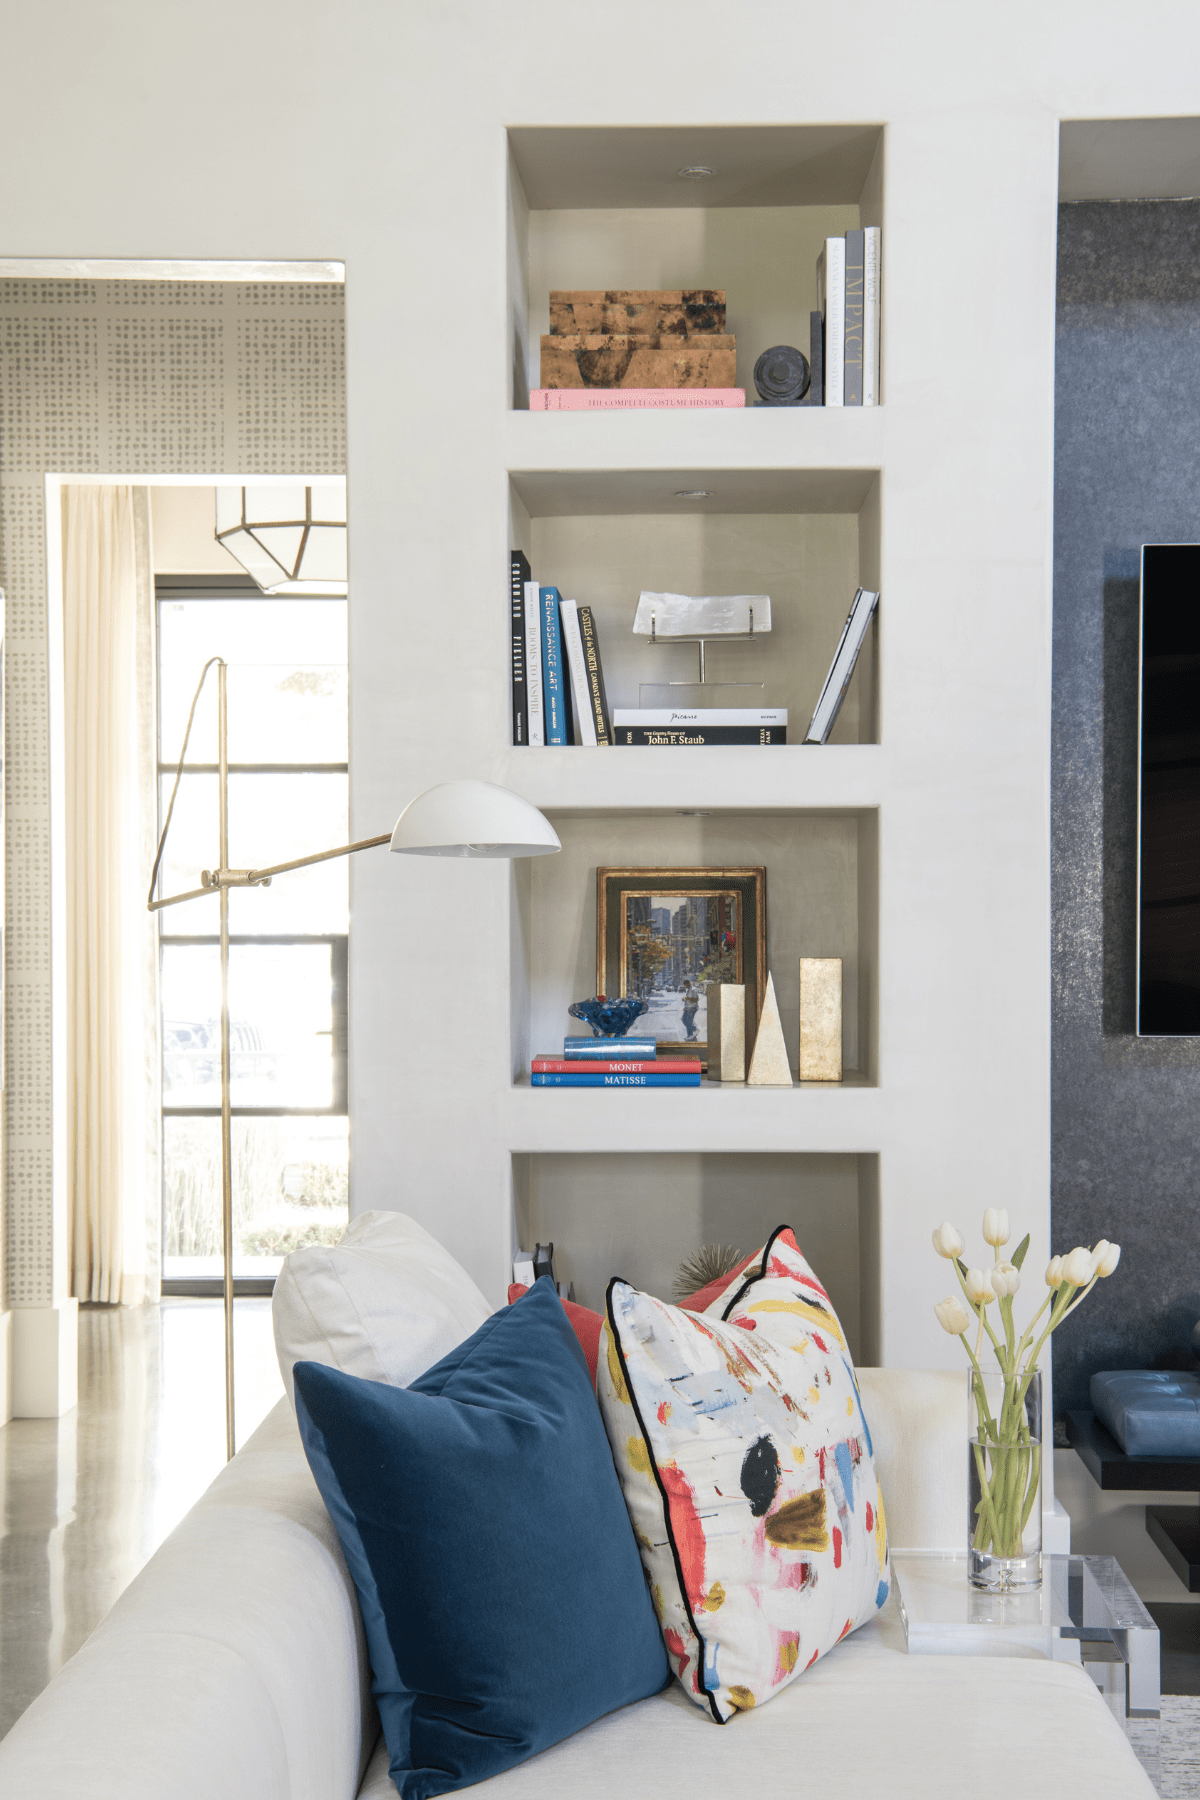 A floor lamp and sofa with vibrant, decorative pillows in front of a recessed shelf space.